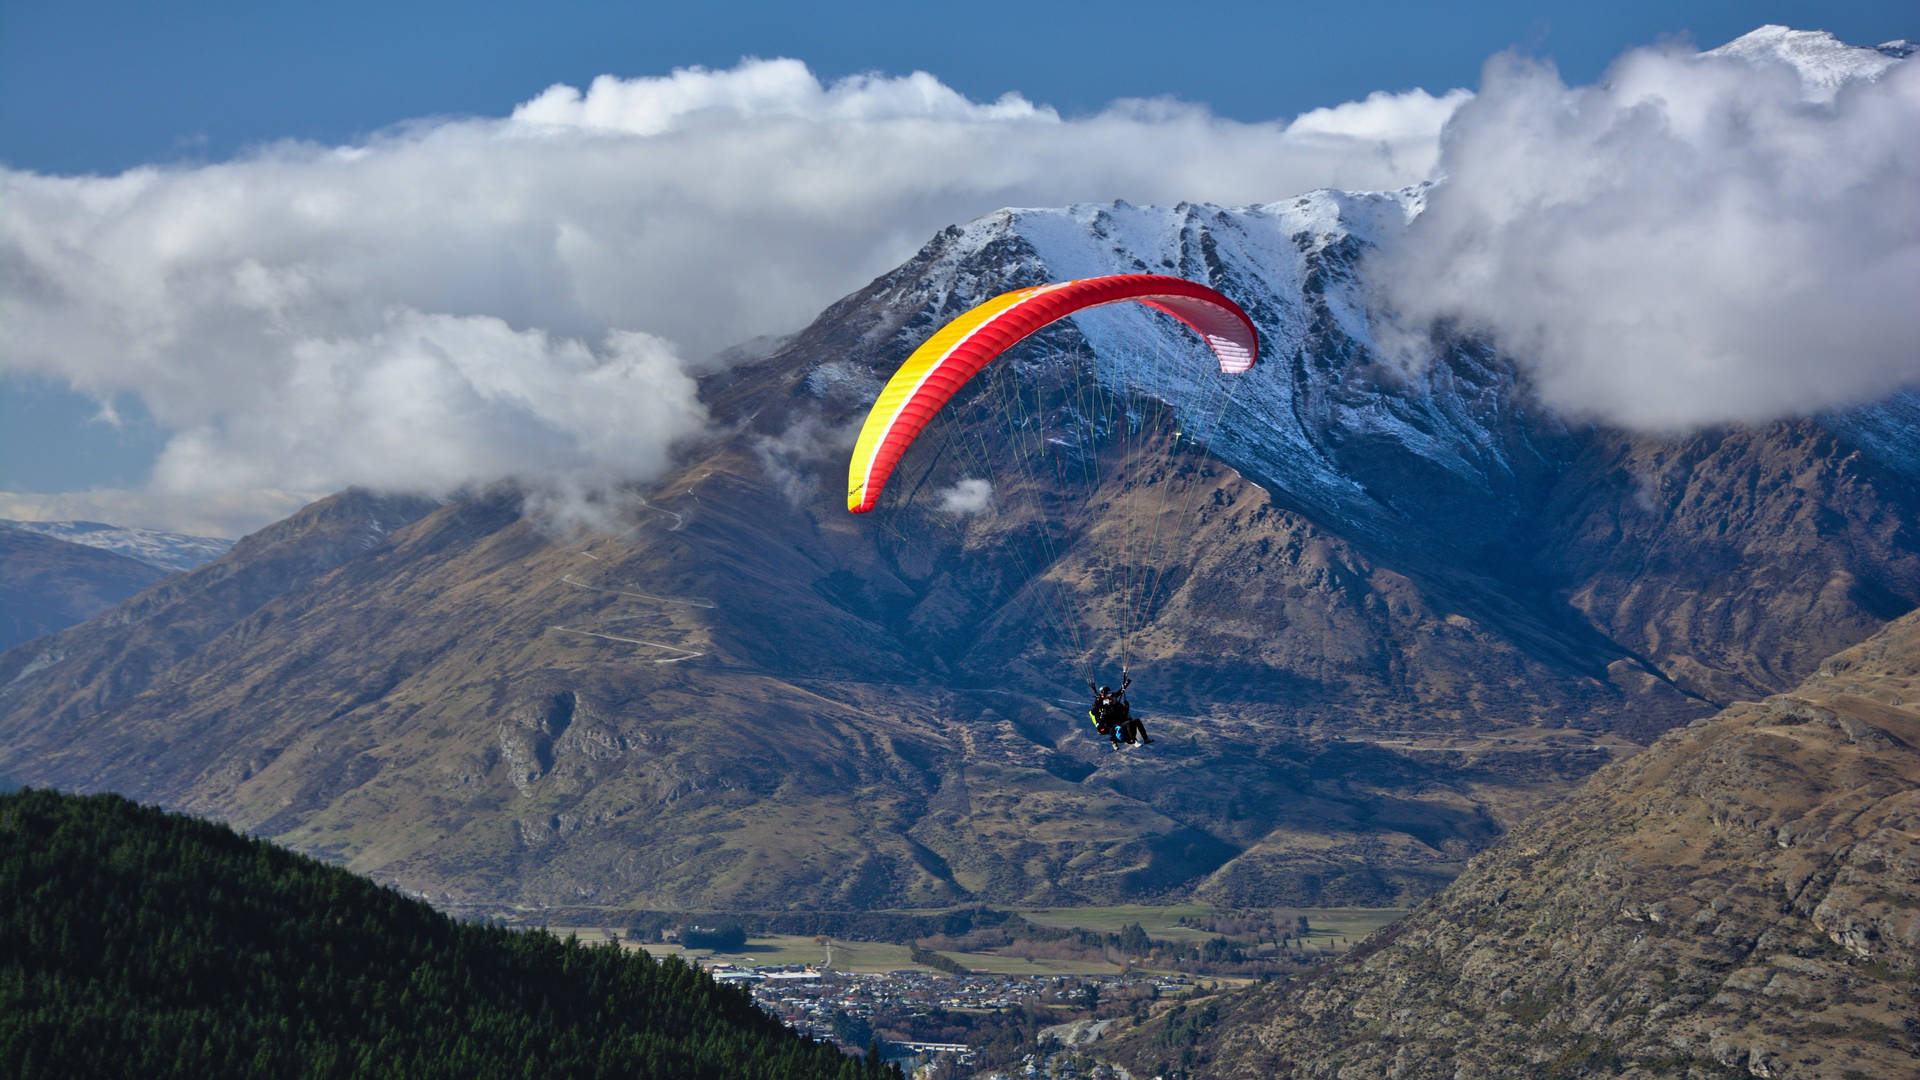 Paragliding Tandem Near Clouds Background